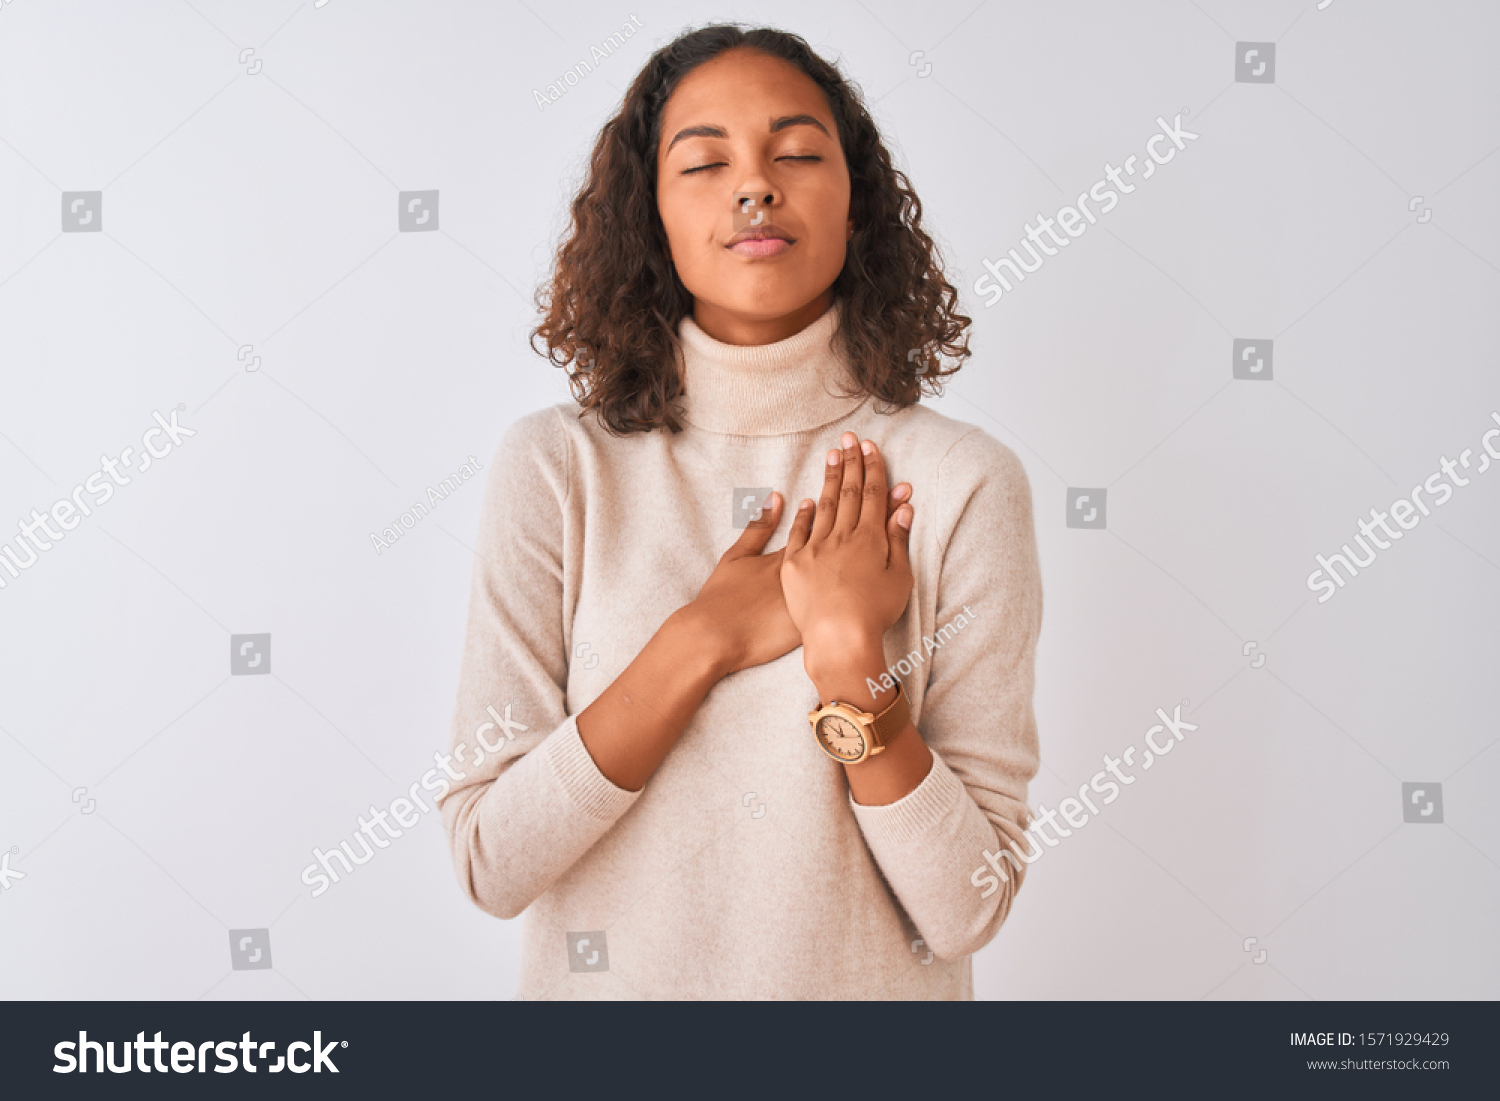 Young brazilian woman wearing turtleneck sweater standing over isolated white background smiling with hands on chest with closed eyes and grateful gesture on face. Health concept. #1571929429